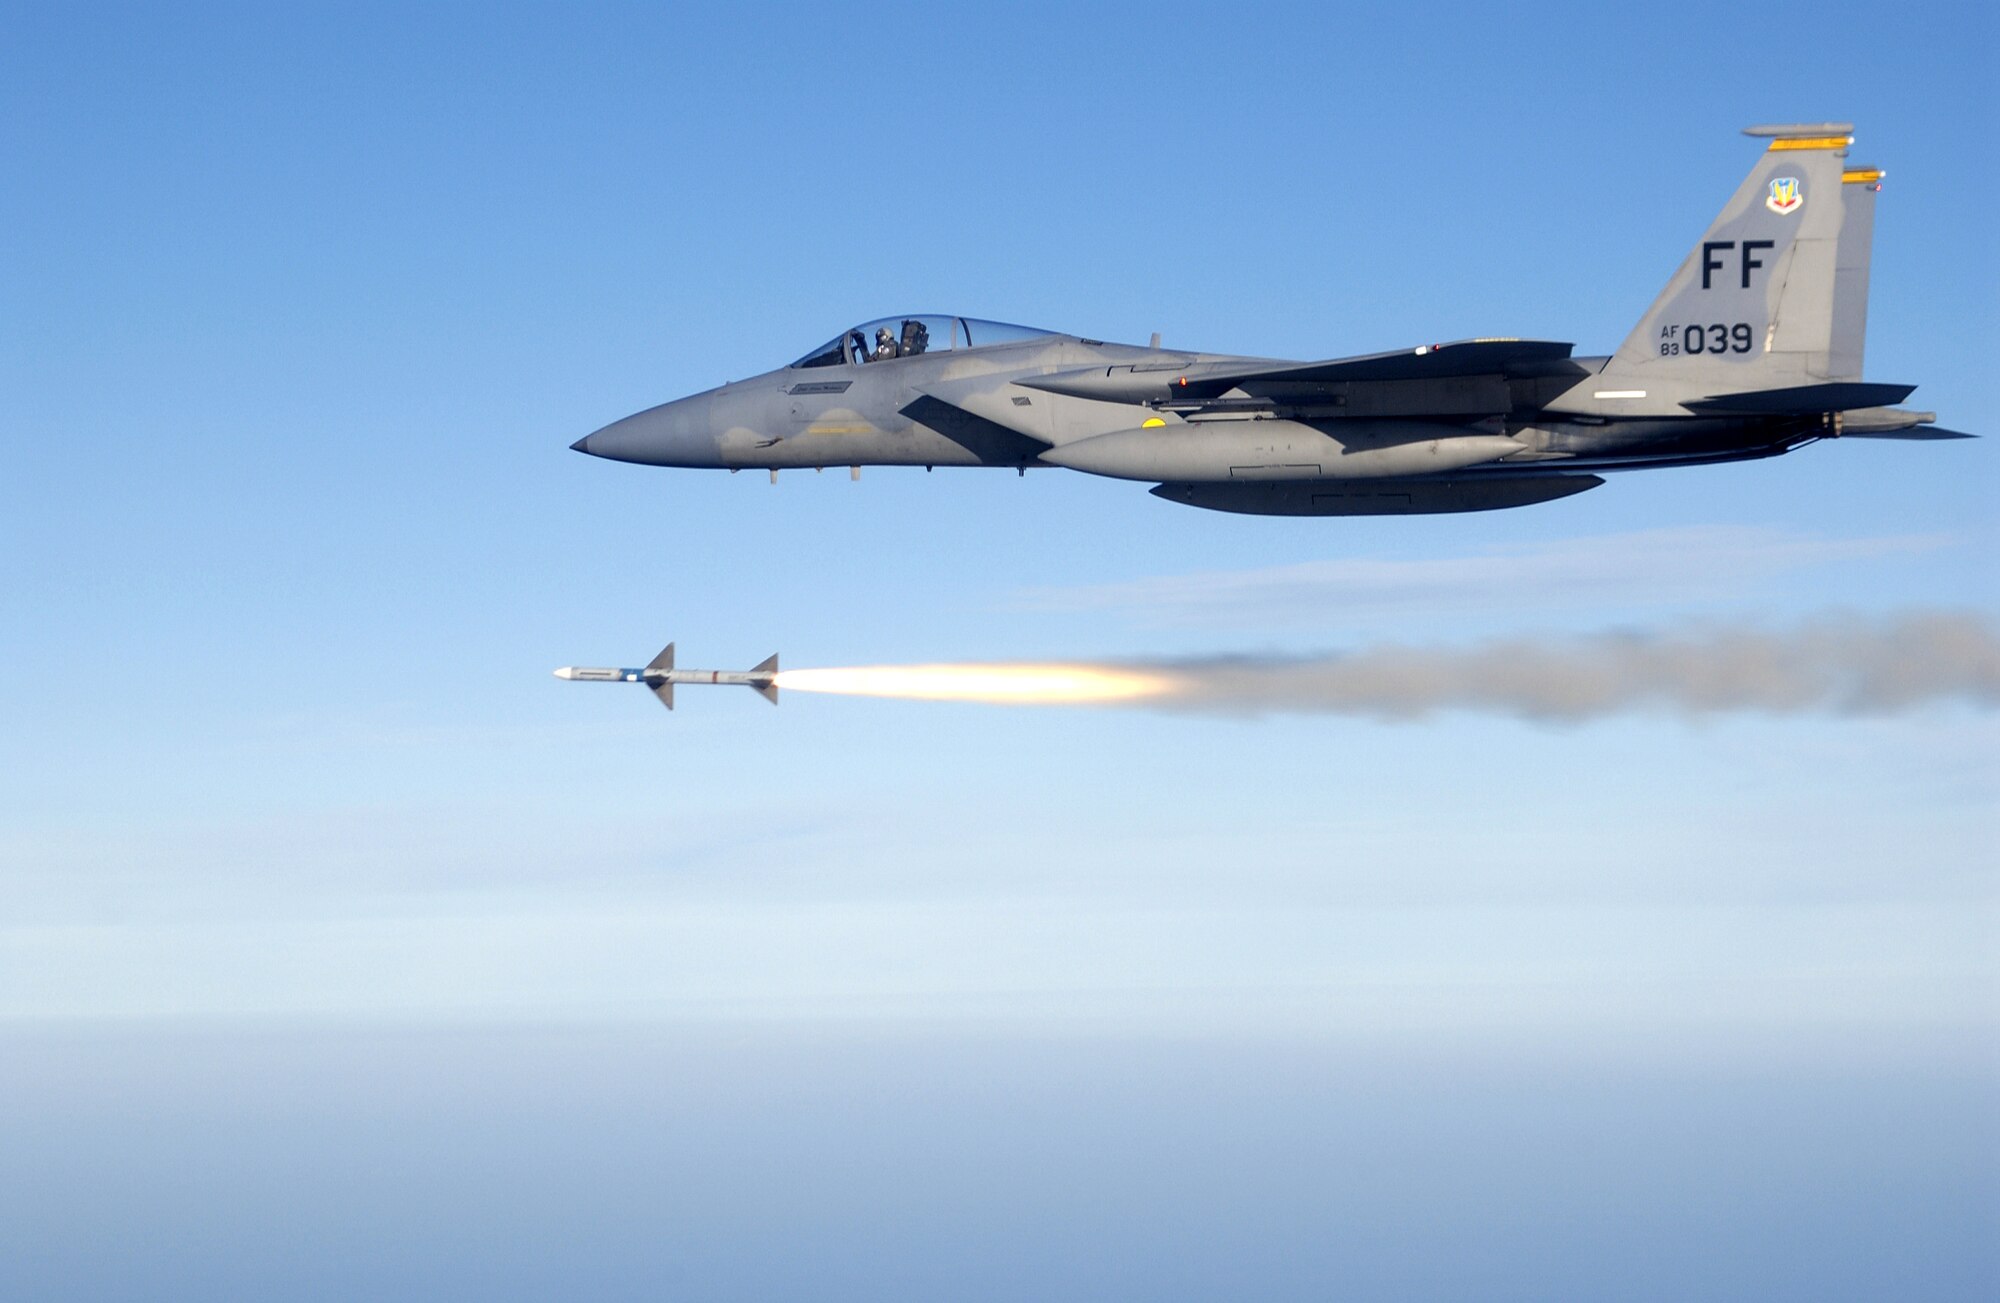 OVER THE GULF OF MEXICO -- First Lt. Charles Schuck fires an AIM-7 Sparrow medium range air-to-air missile from an F-15 Eagle here while supporting a Combat Archer air-to-air weapons system evaluation program mission.  He and other Airmen of the 71st Fighter Squadron deployed from Langley Air Force Base, Va., to Tyndall AFB, Fla., to support the program.  (U.S. Air Force photo by Master Sgt. Michael Ammons) 